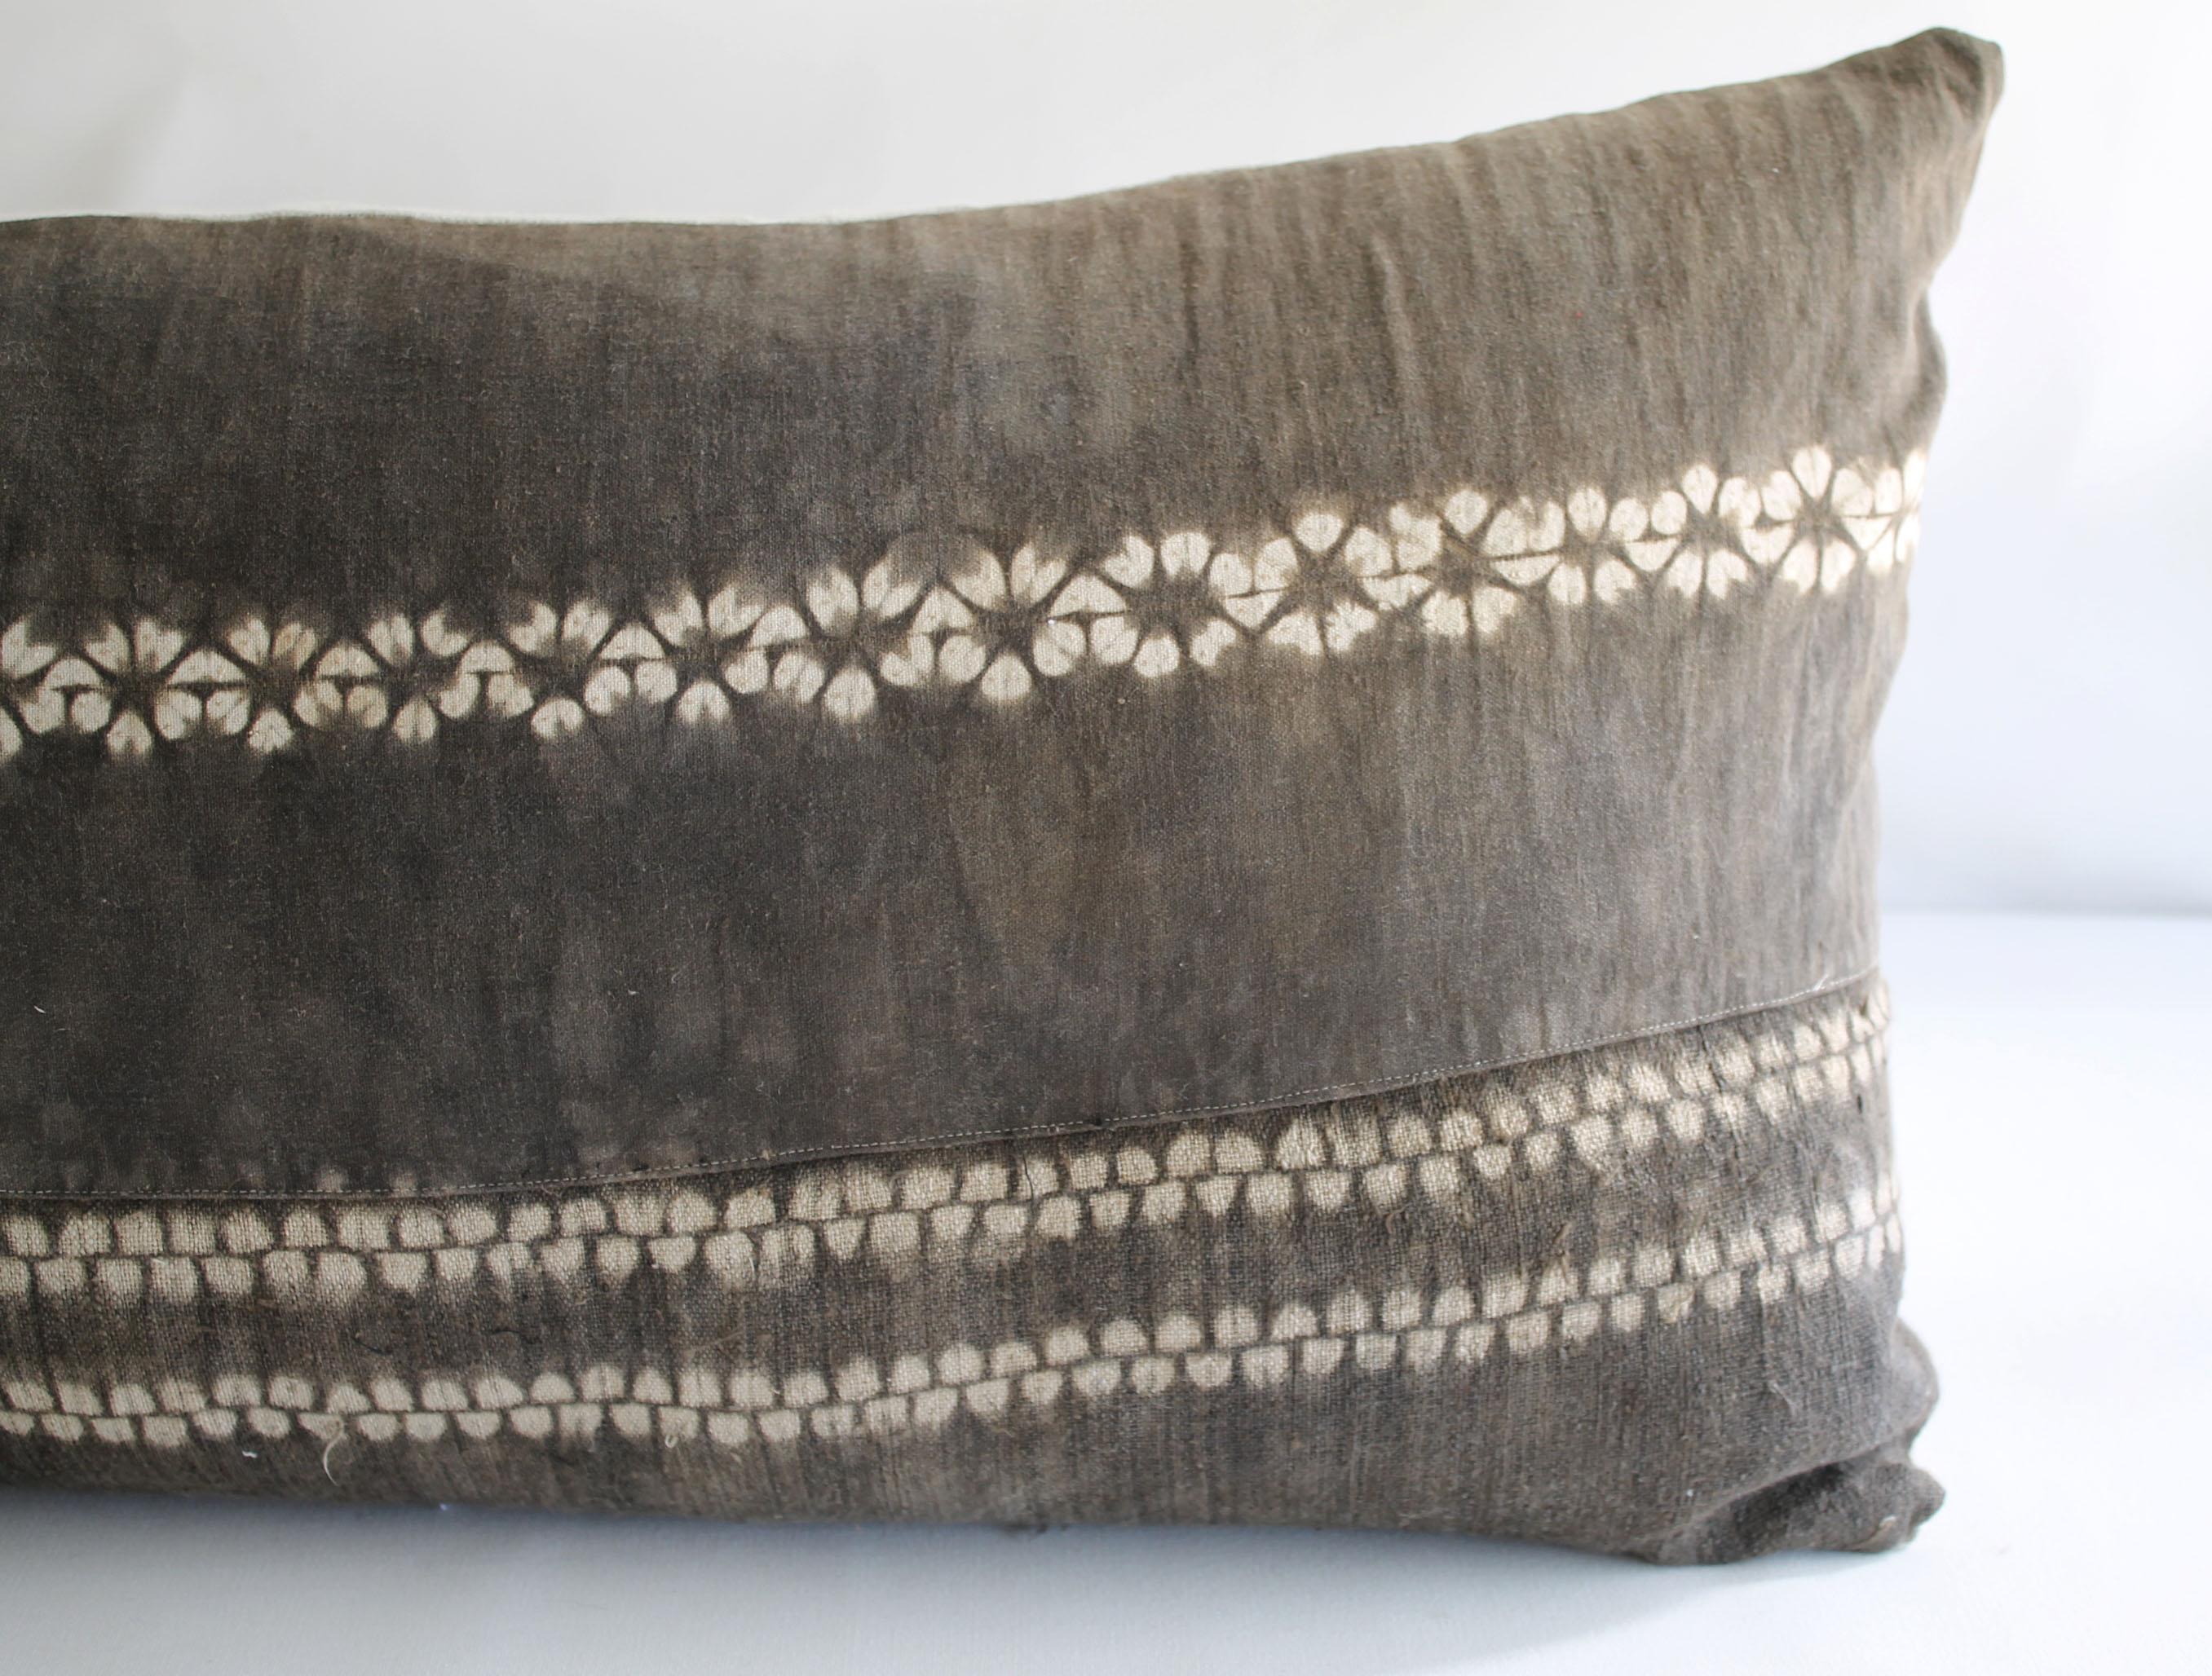 Vintage Bleached Batik textile lumbar pillow Beautiful faded brown batik with light natural linen colored pattern dots horizontally across the face. The backside is a natural Belgian linen, with hidden zipper closure. Custom size insert is